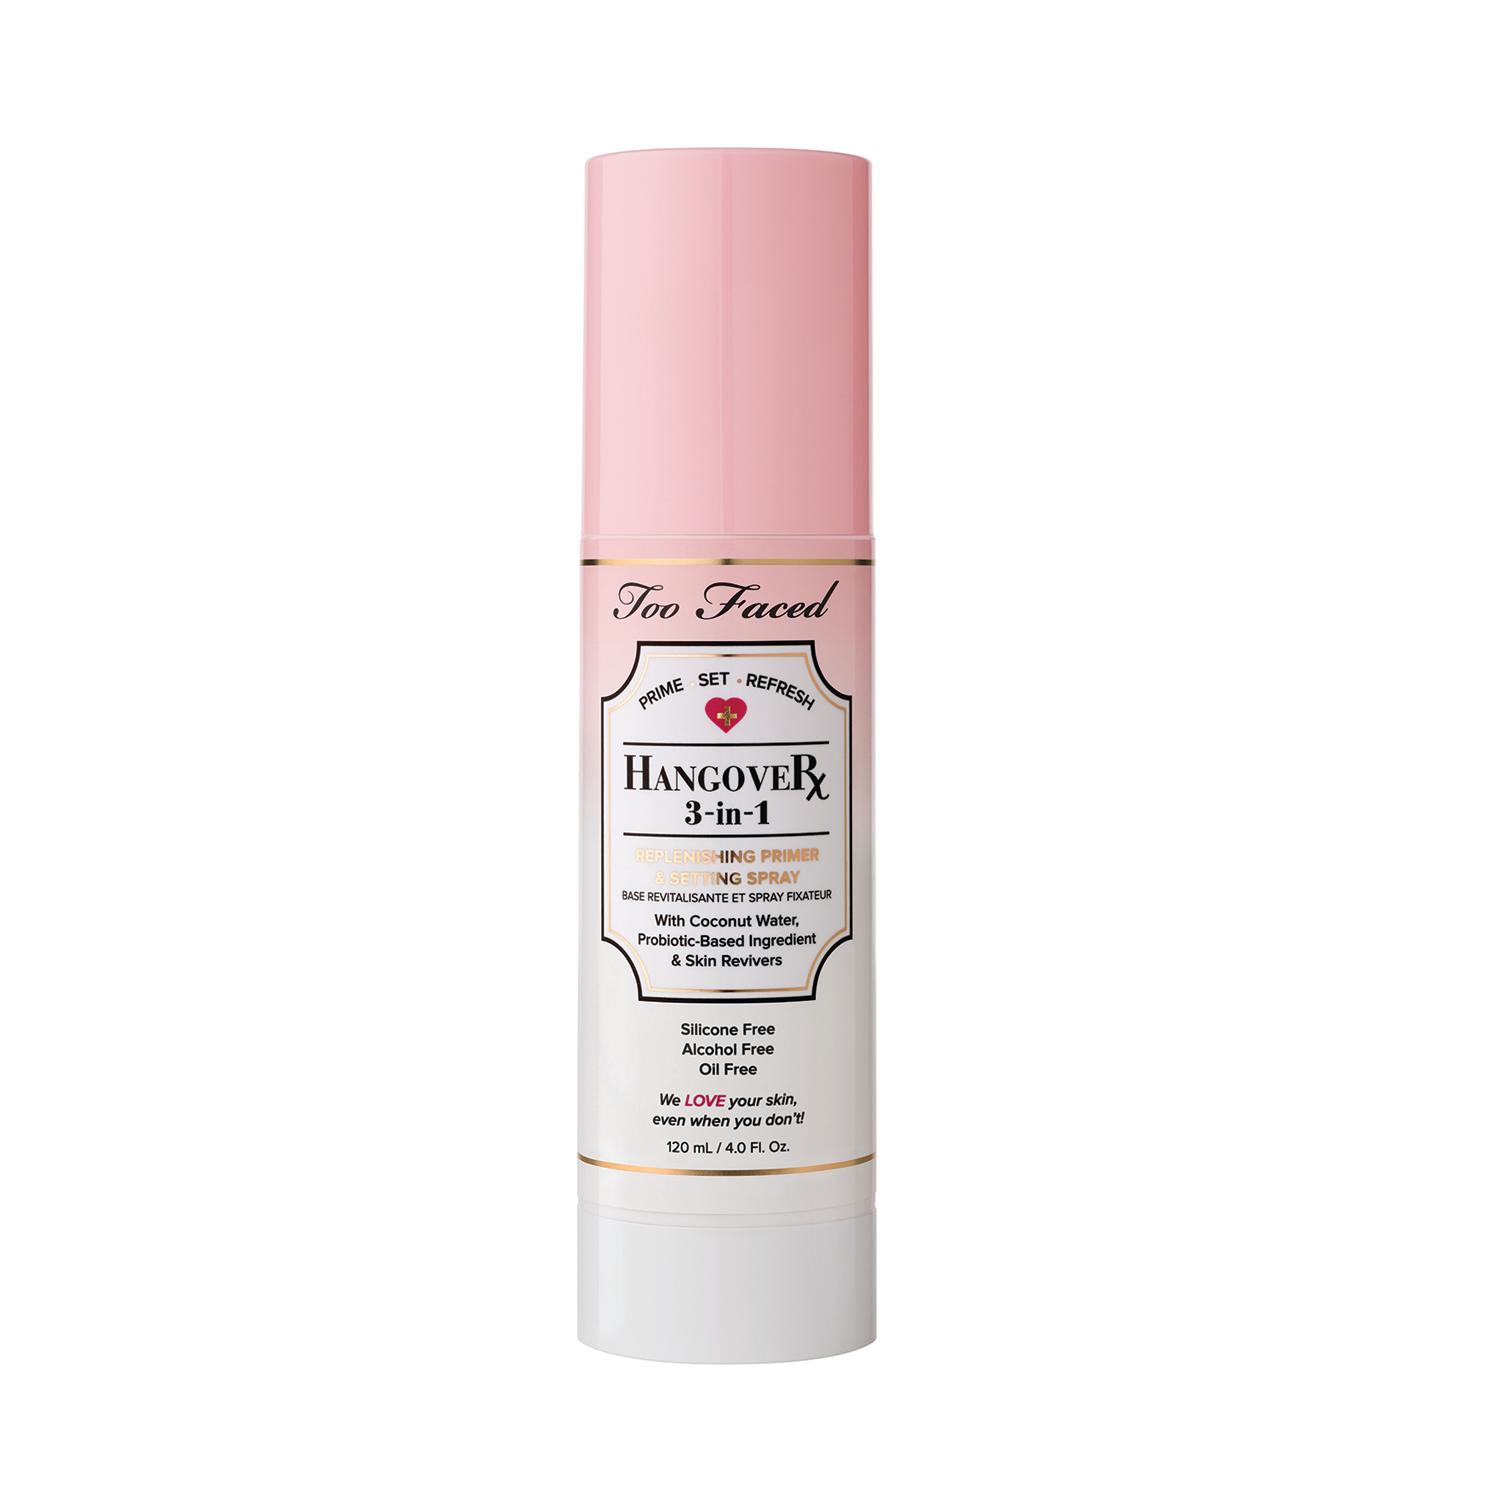 Too Faced | Too Faced Hangover 3-In-1 Primer & Setting Spray (120ml)